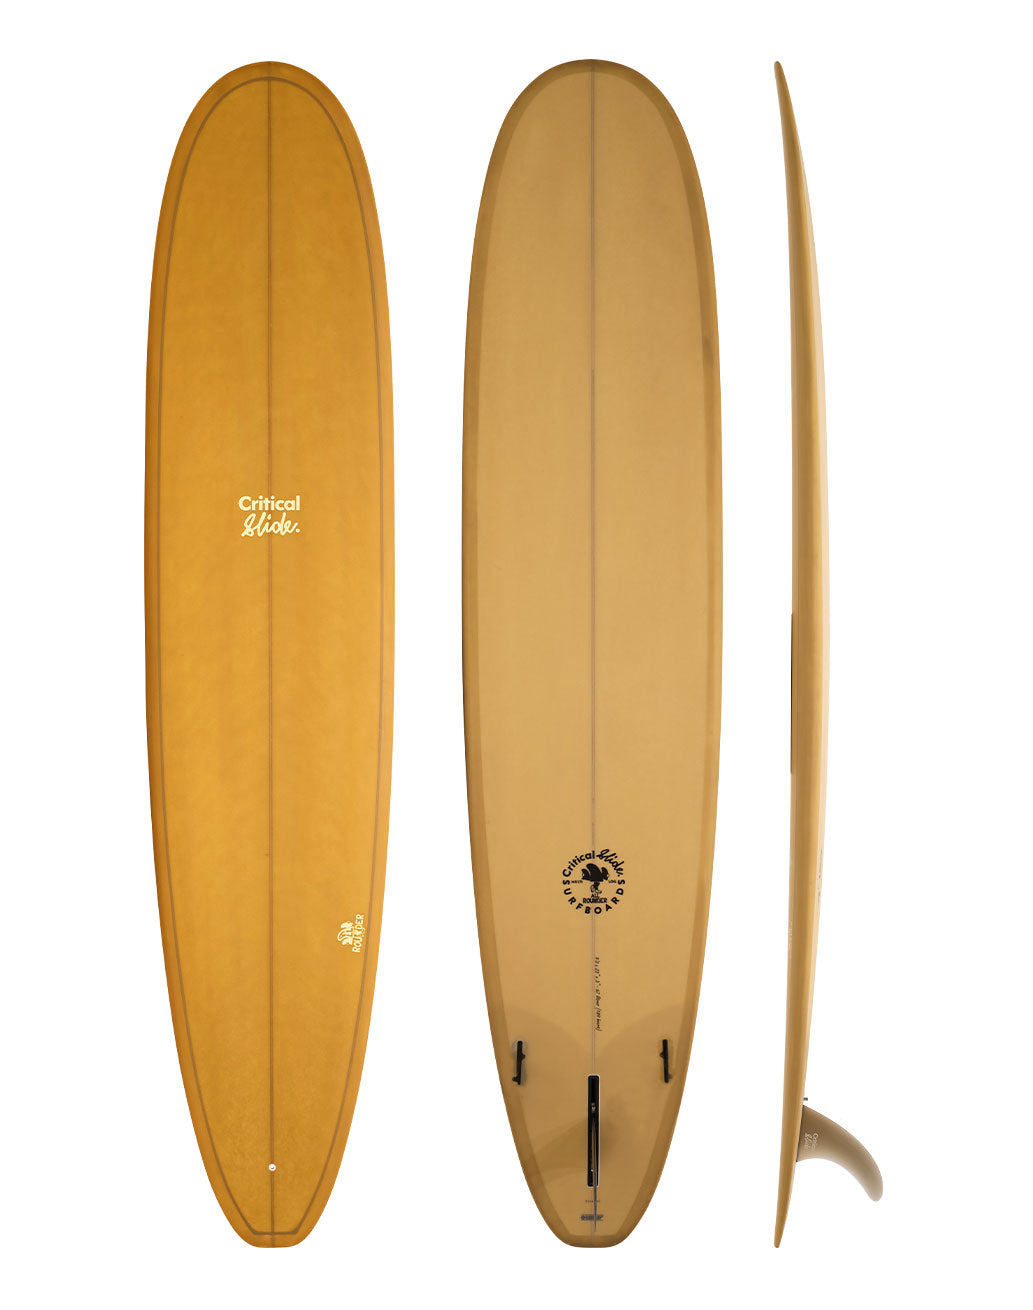 The Critical Slide Society Surfboards - All Rounder - straw yellow coloured longboard